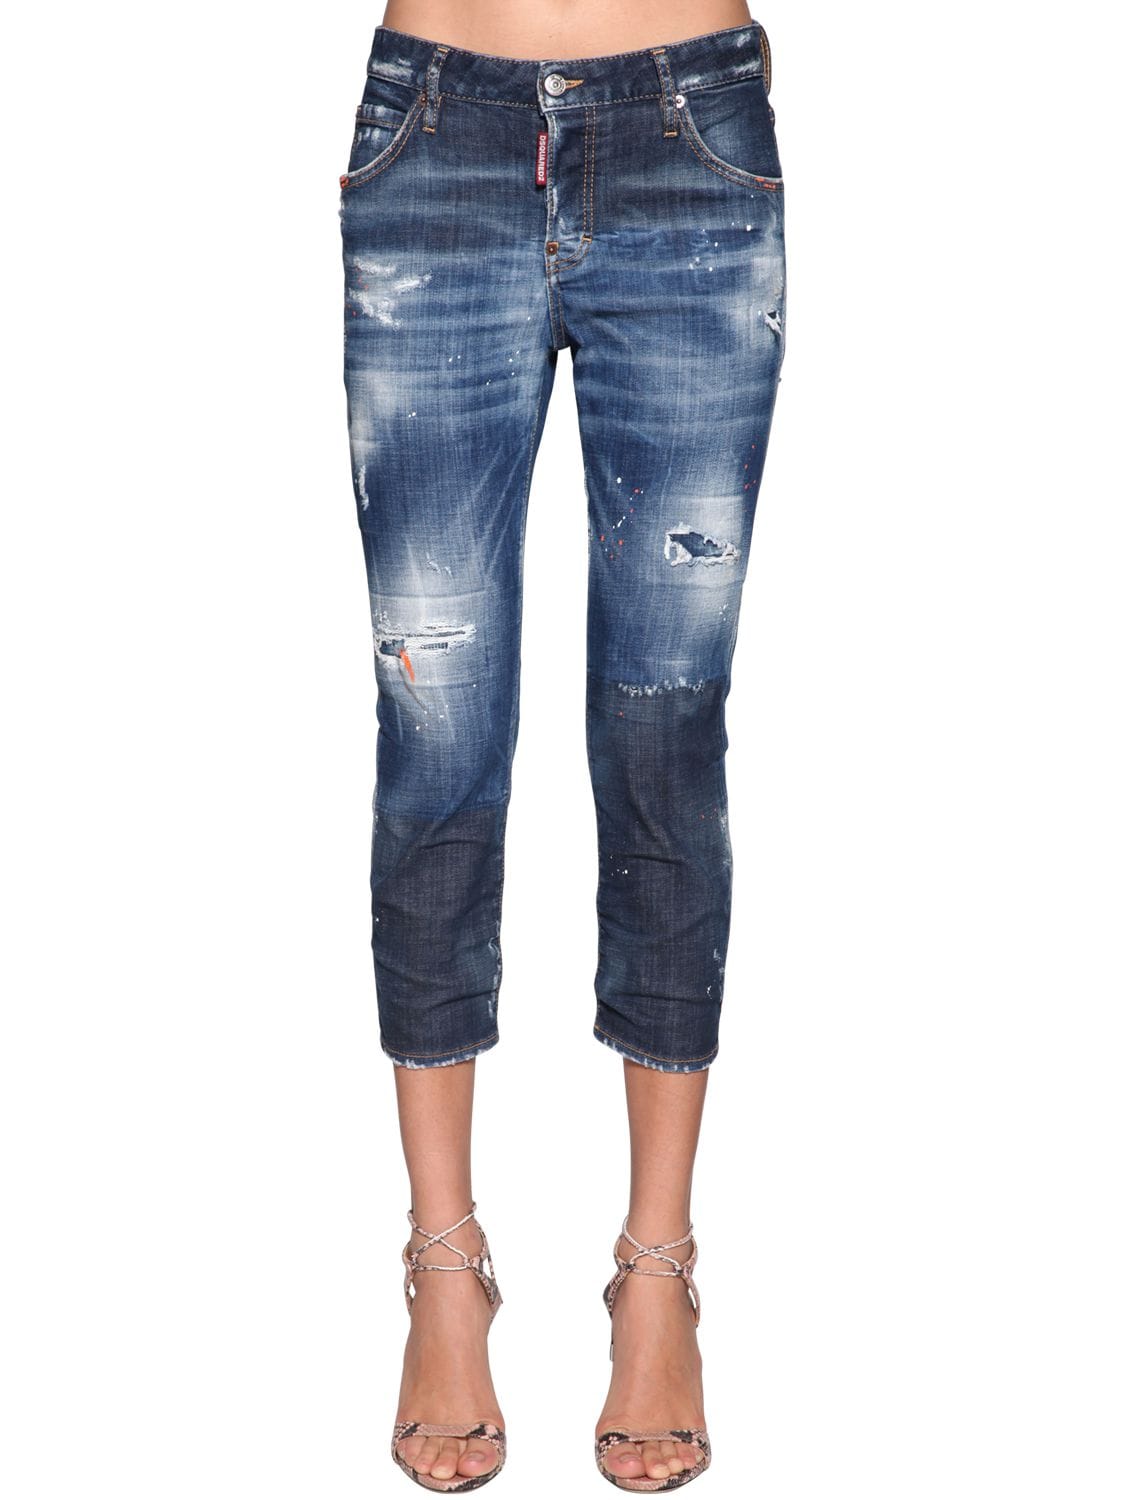 DSQUARED2 COOL GIRL DENIM CROPPED JEANS,71I07Y069-NDCW0